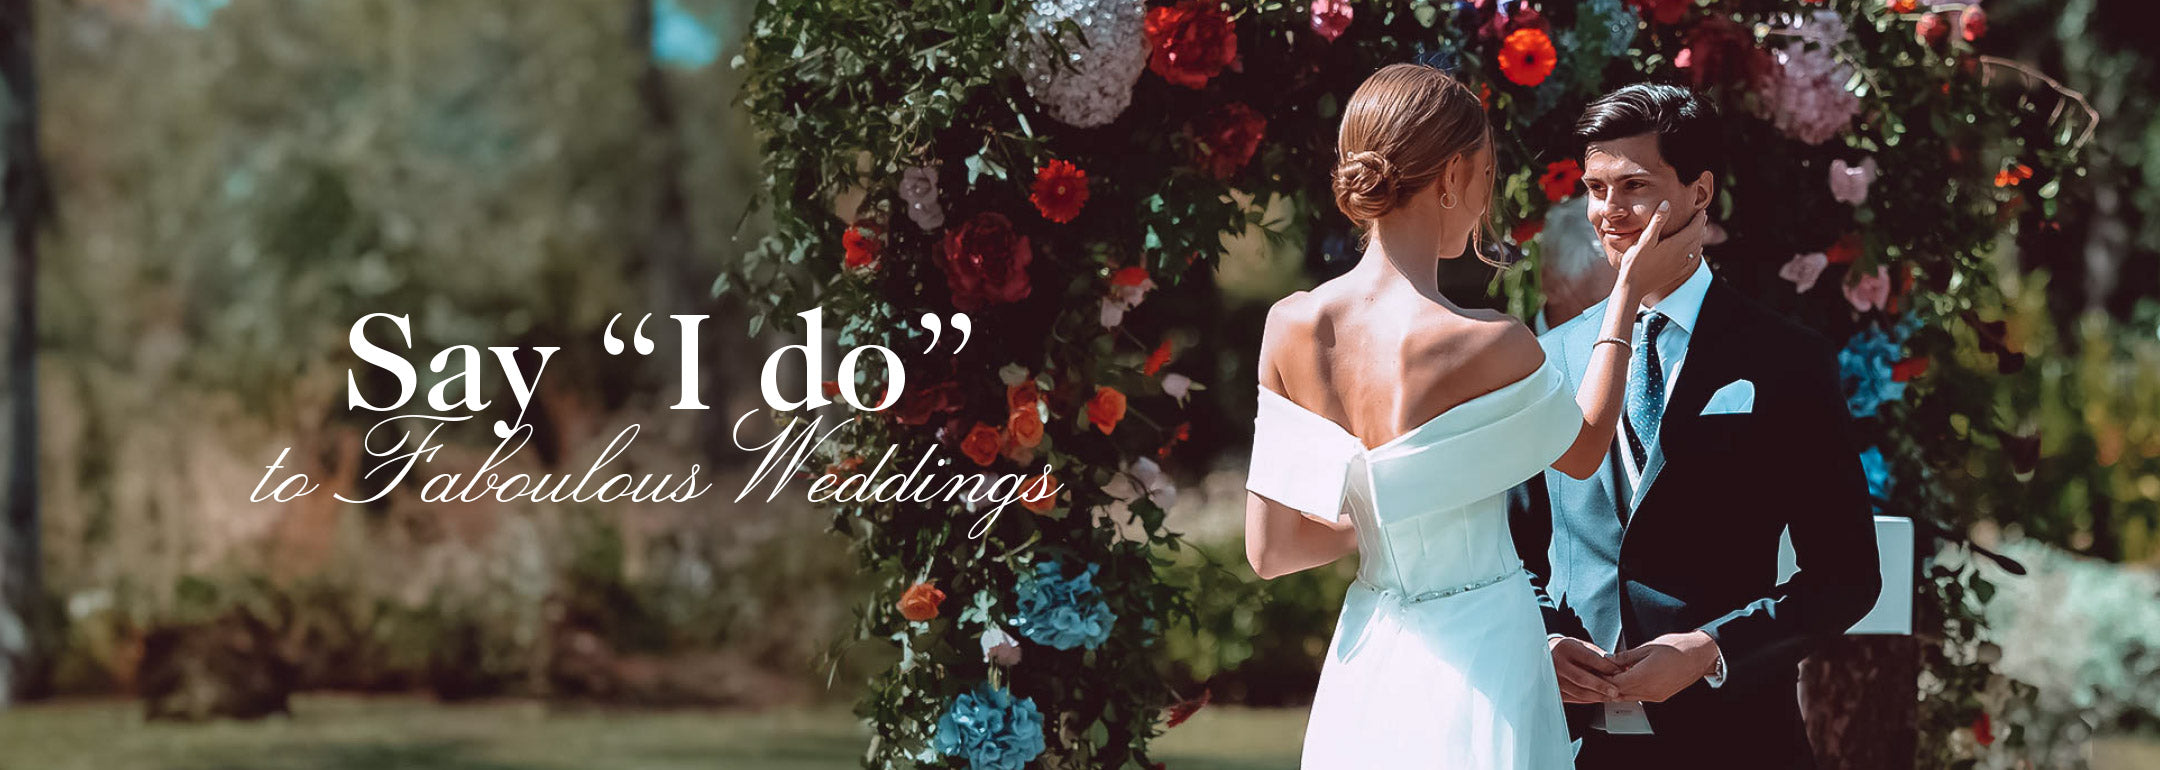 Bride in an off-shoulder white dress tenderly touching groom's face, standing under a colourful flower arch with text 'Say "I do" to Fabulous Weddings.' Weddings at Fabulous Flowers and Gifts.